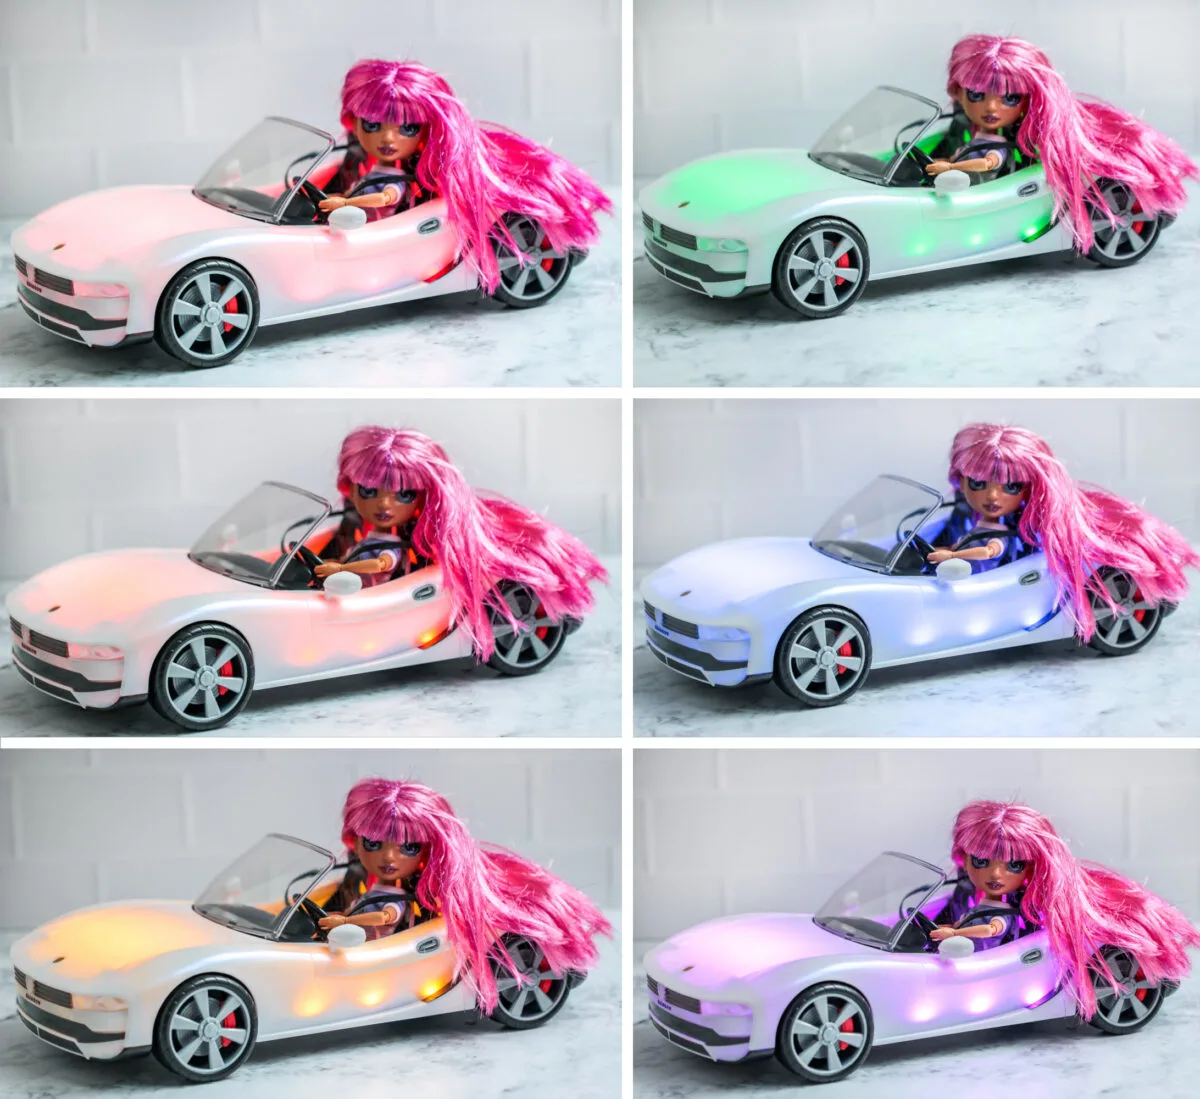 Pull up to Rainbow High in style with the Rainbow High Convertible Color Change Car. Take your favorite Rainbow High Dolls out for a spin.